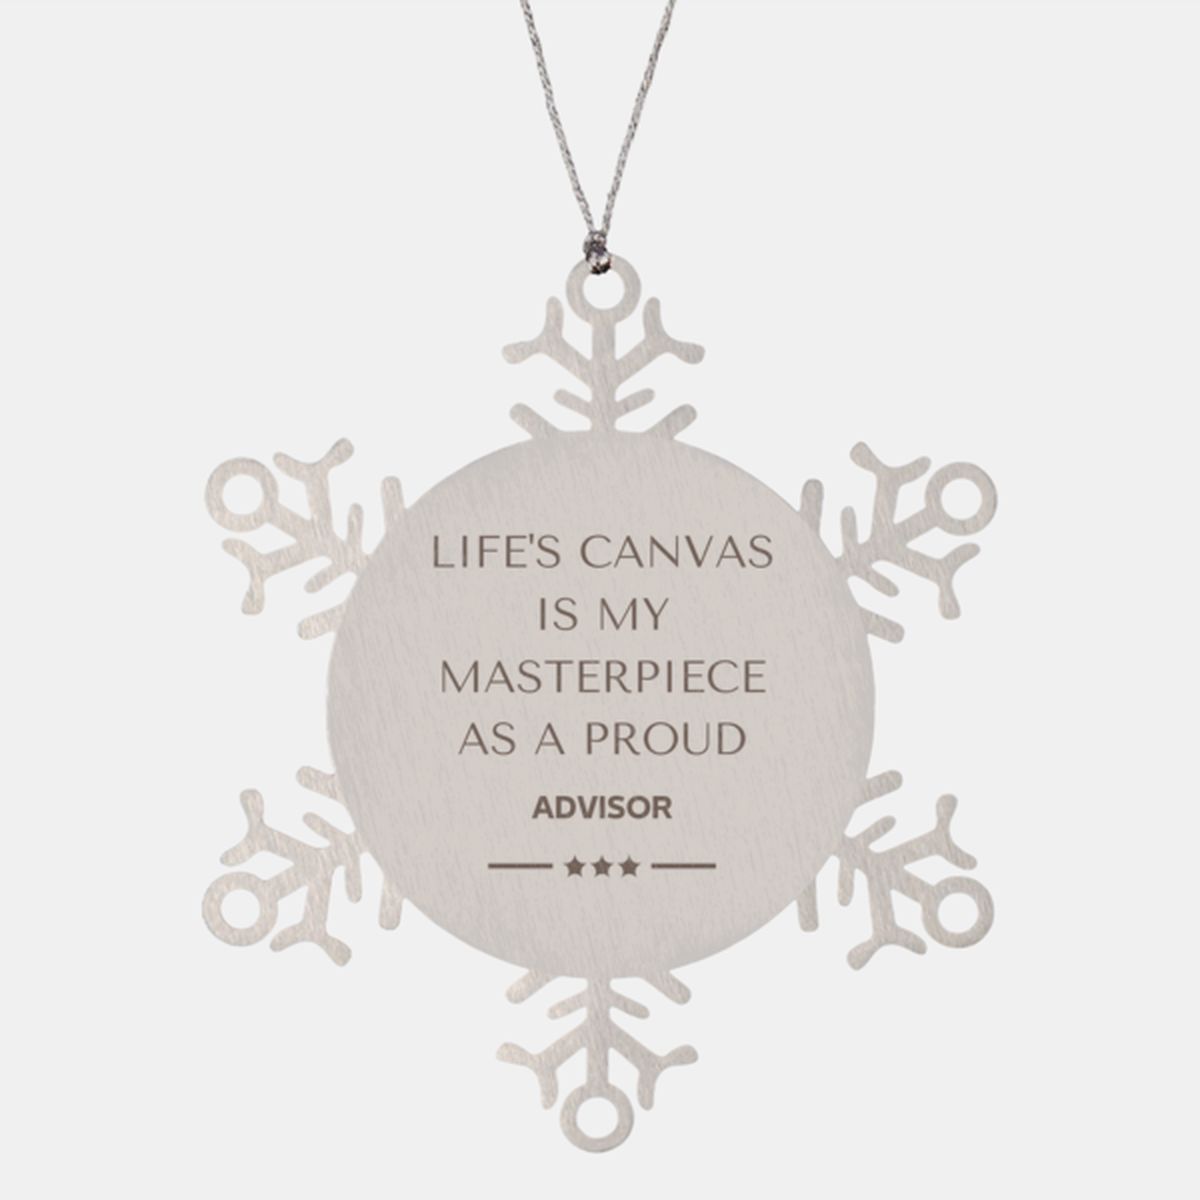 Proud Advisor Gifts, Life's canvas is my masterpiece, Epic Birthday Christmas Unique Snowflake Ornament For Advisor, Coworkers, Men, Women, Friends